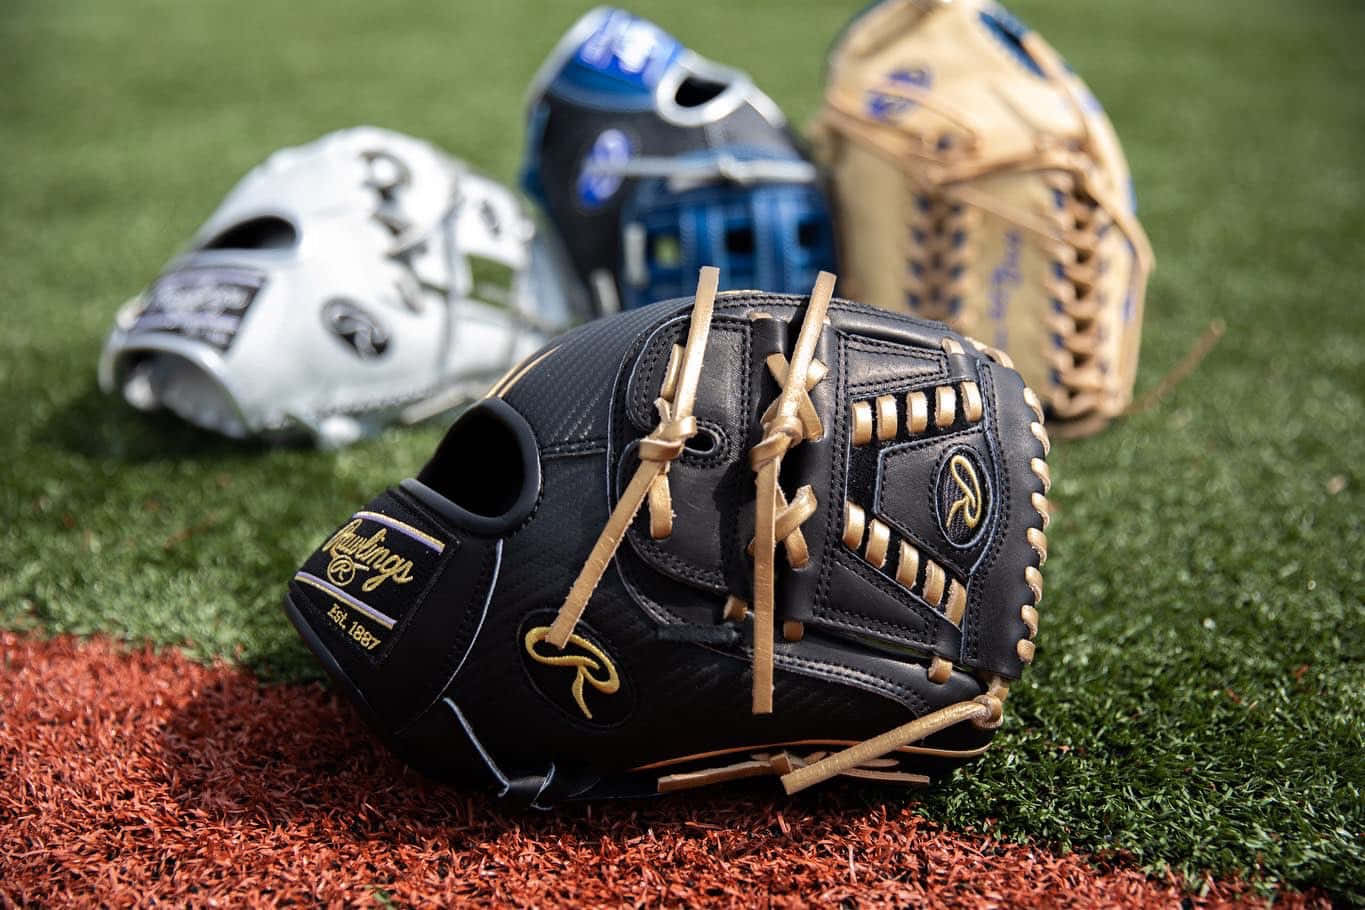 Baseball gloves on a playing field Wallpaper